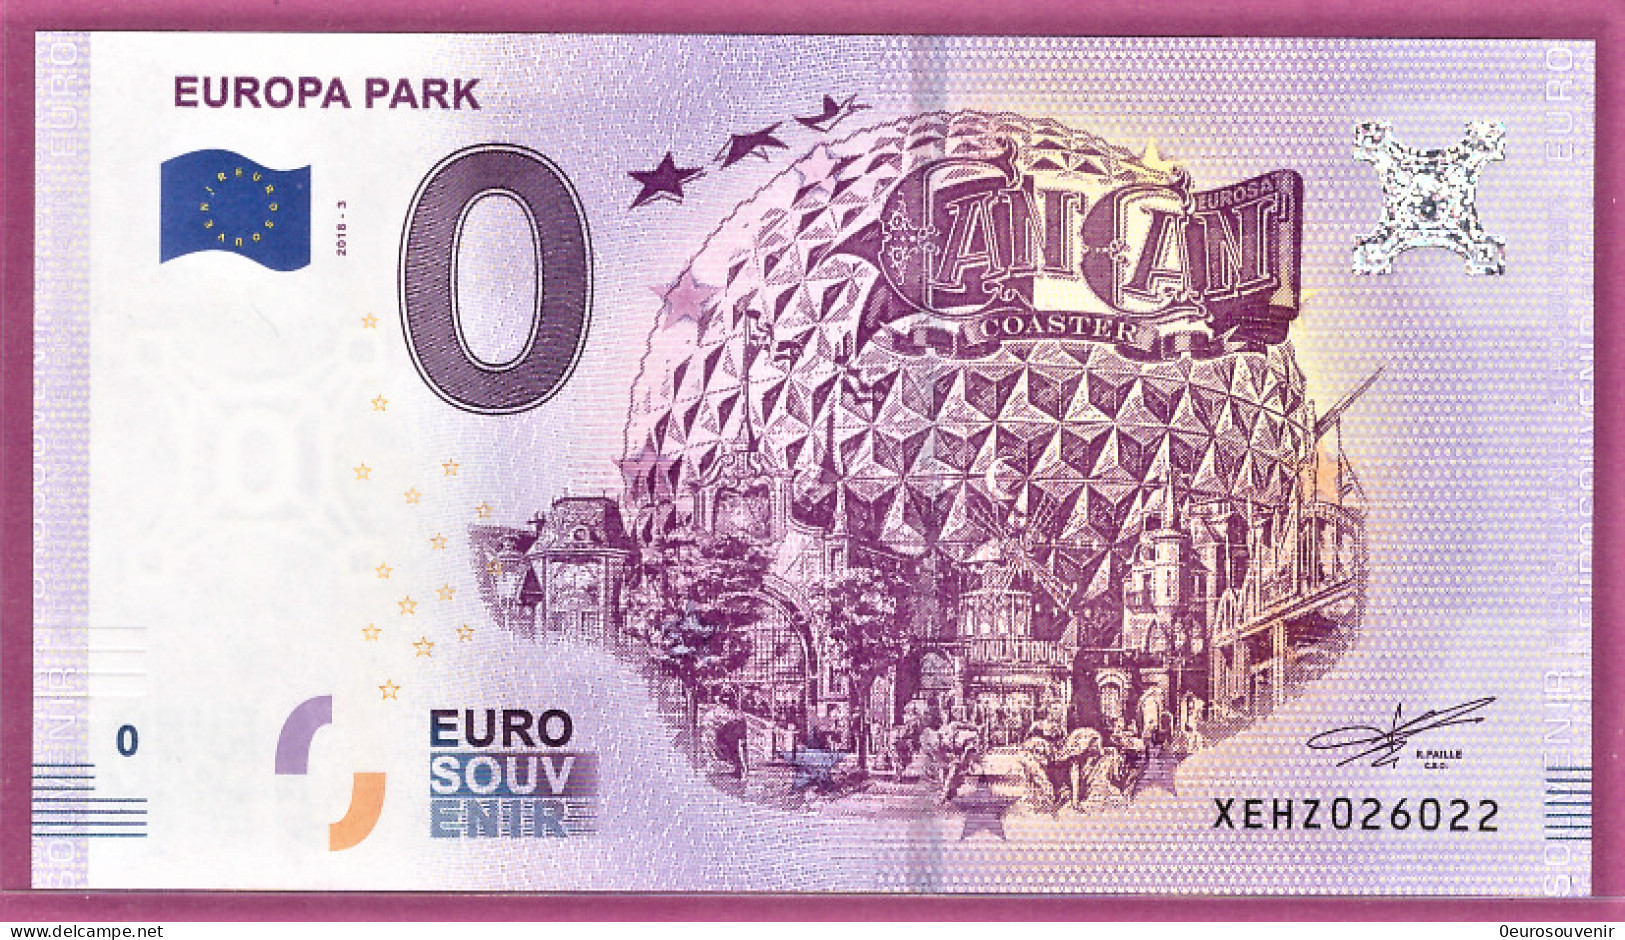 0-Euro XEHZ 2018-3 EUROPA PARK - CAN CAN COASTER - Privatentwürfe